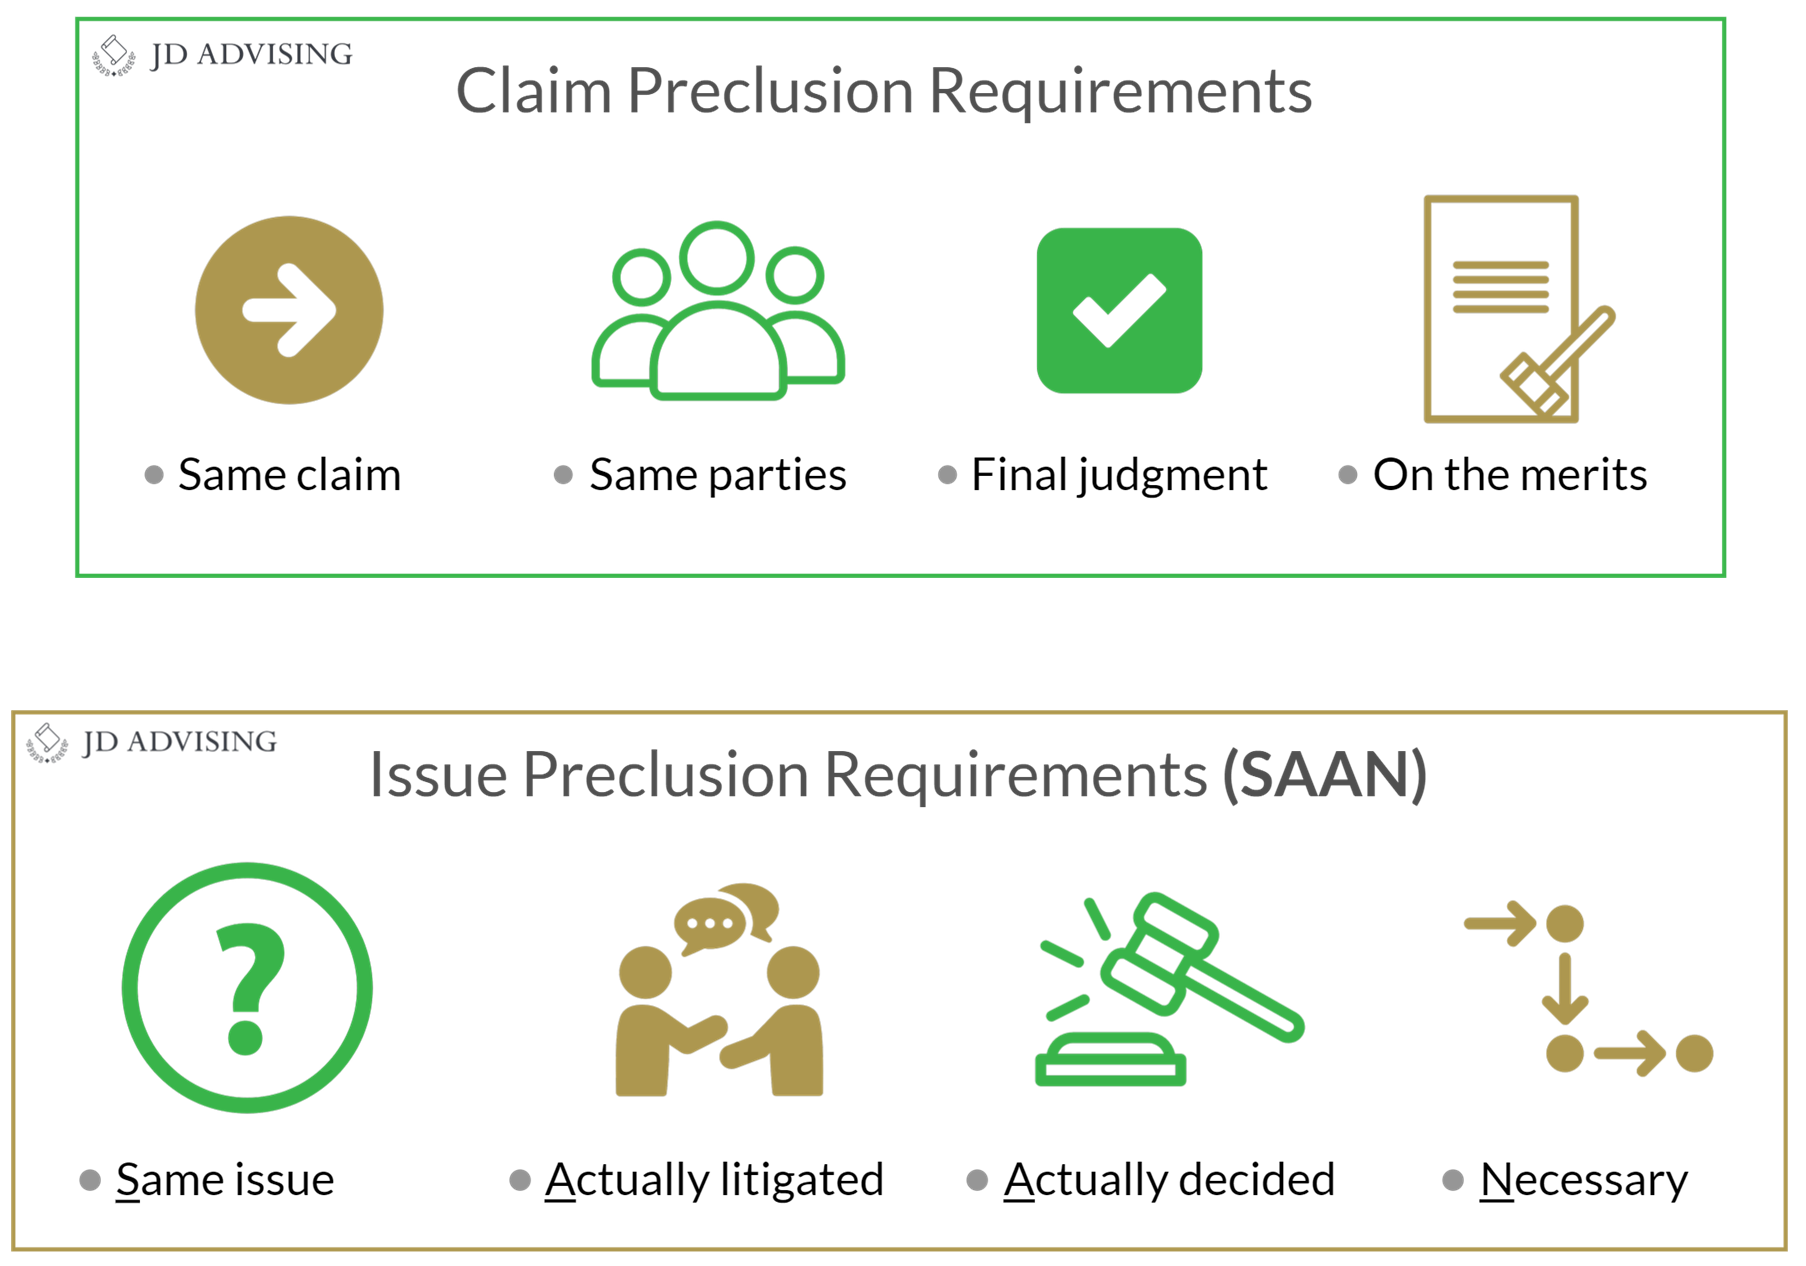 Claim and Issue Preclusion Requirements